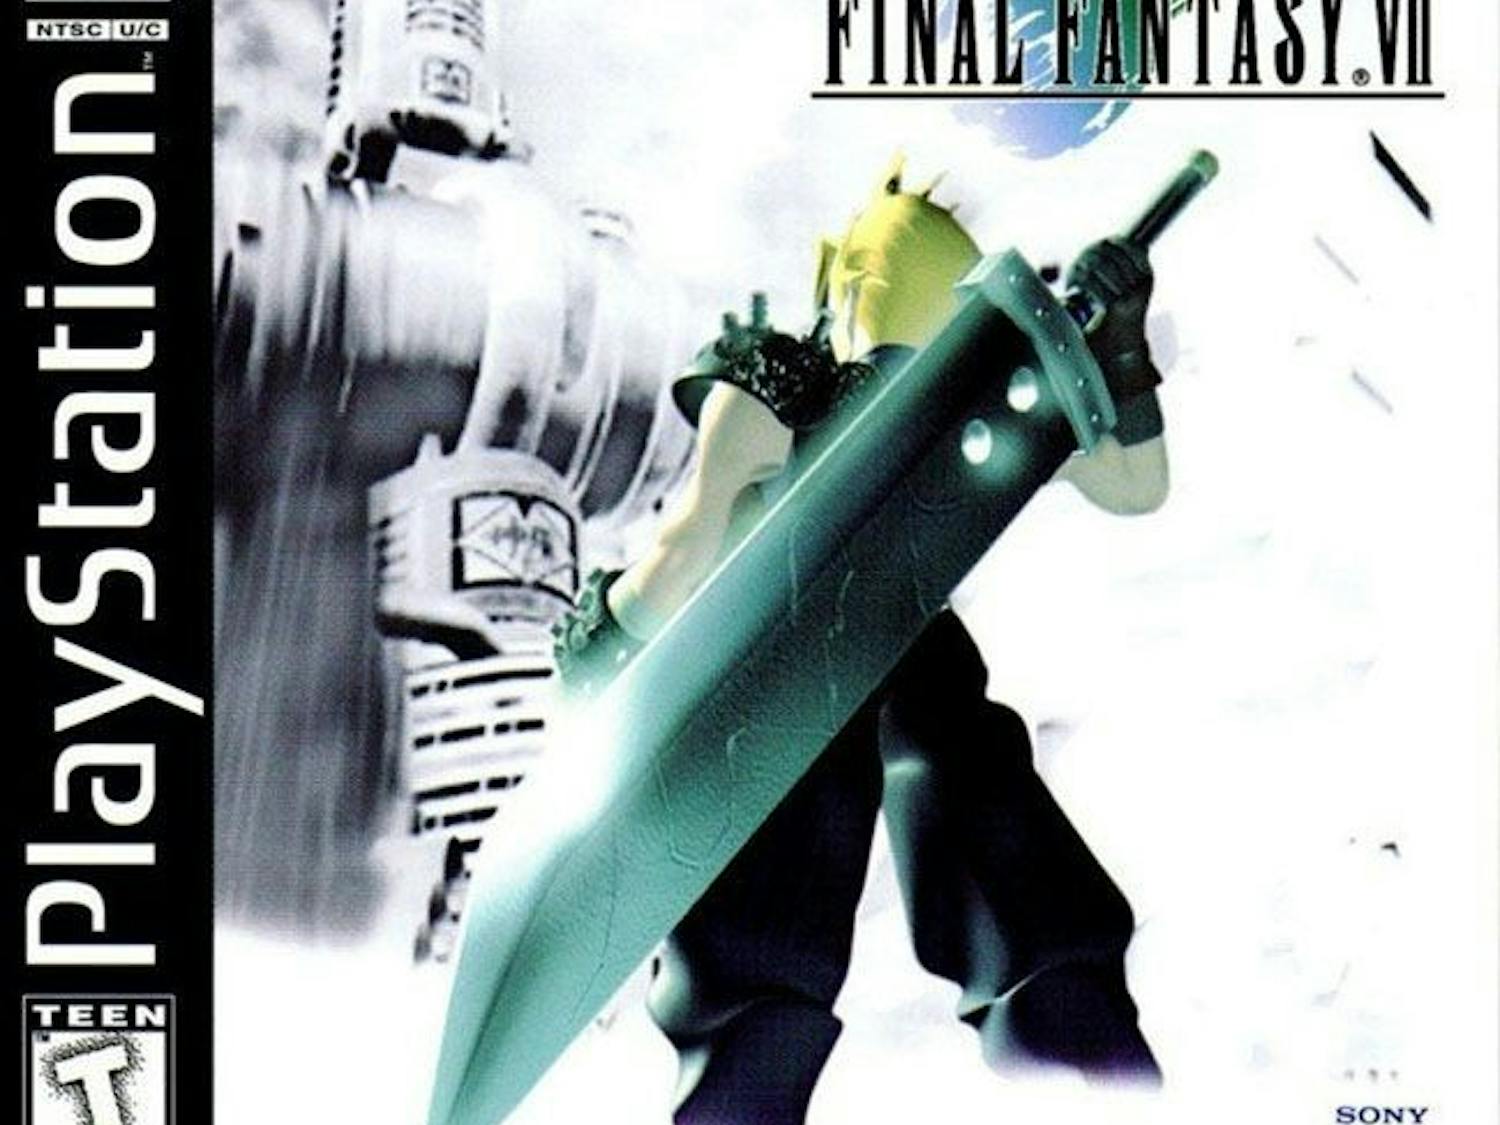 "Final Fantasy VII" was released in 1997 for the PlayStation.